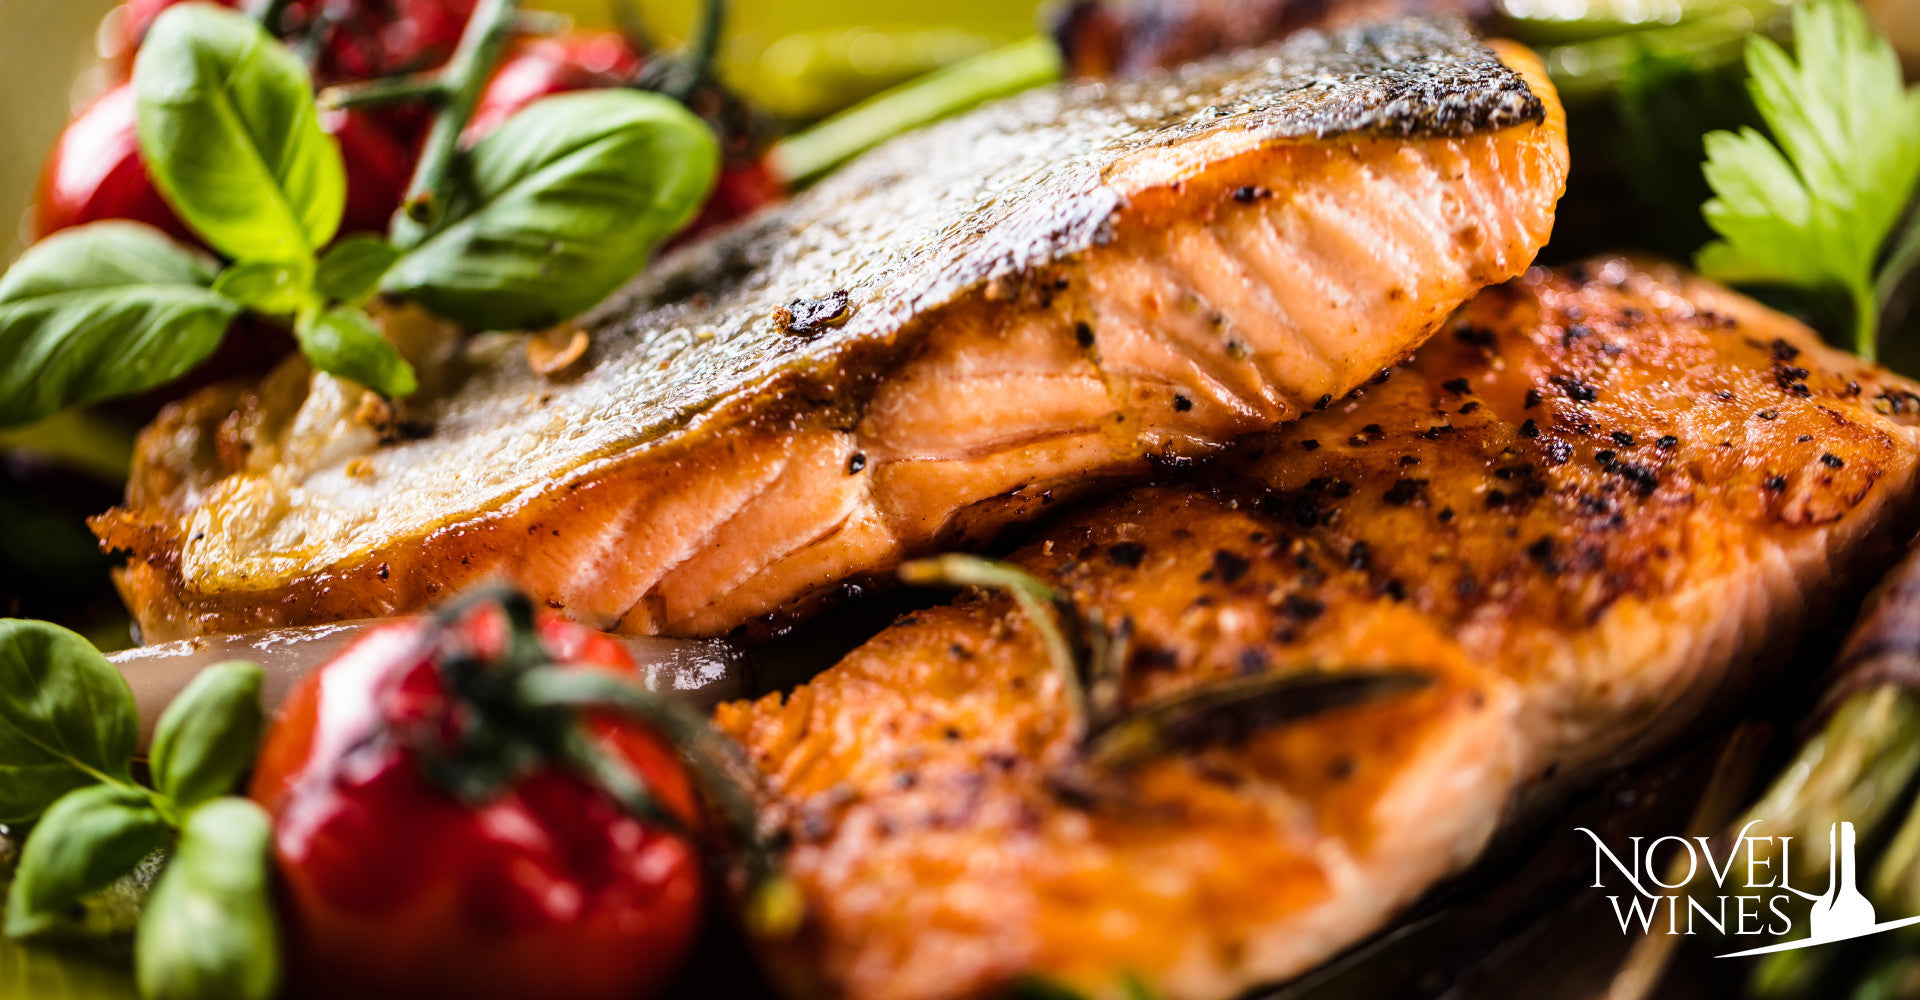 How to pair wine with salmon this Christmas